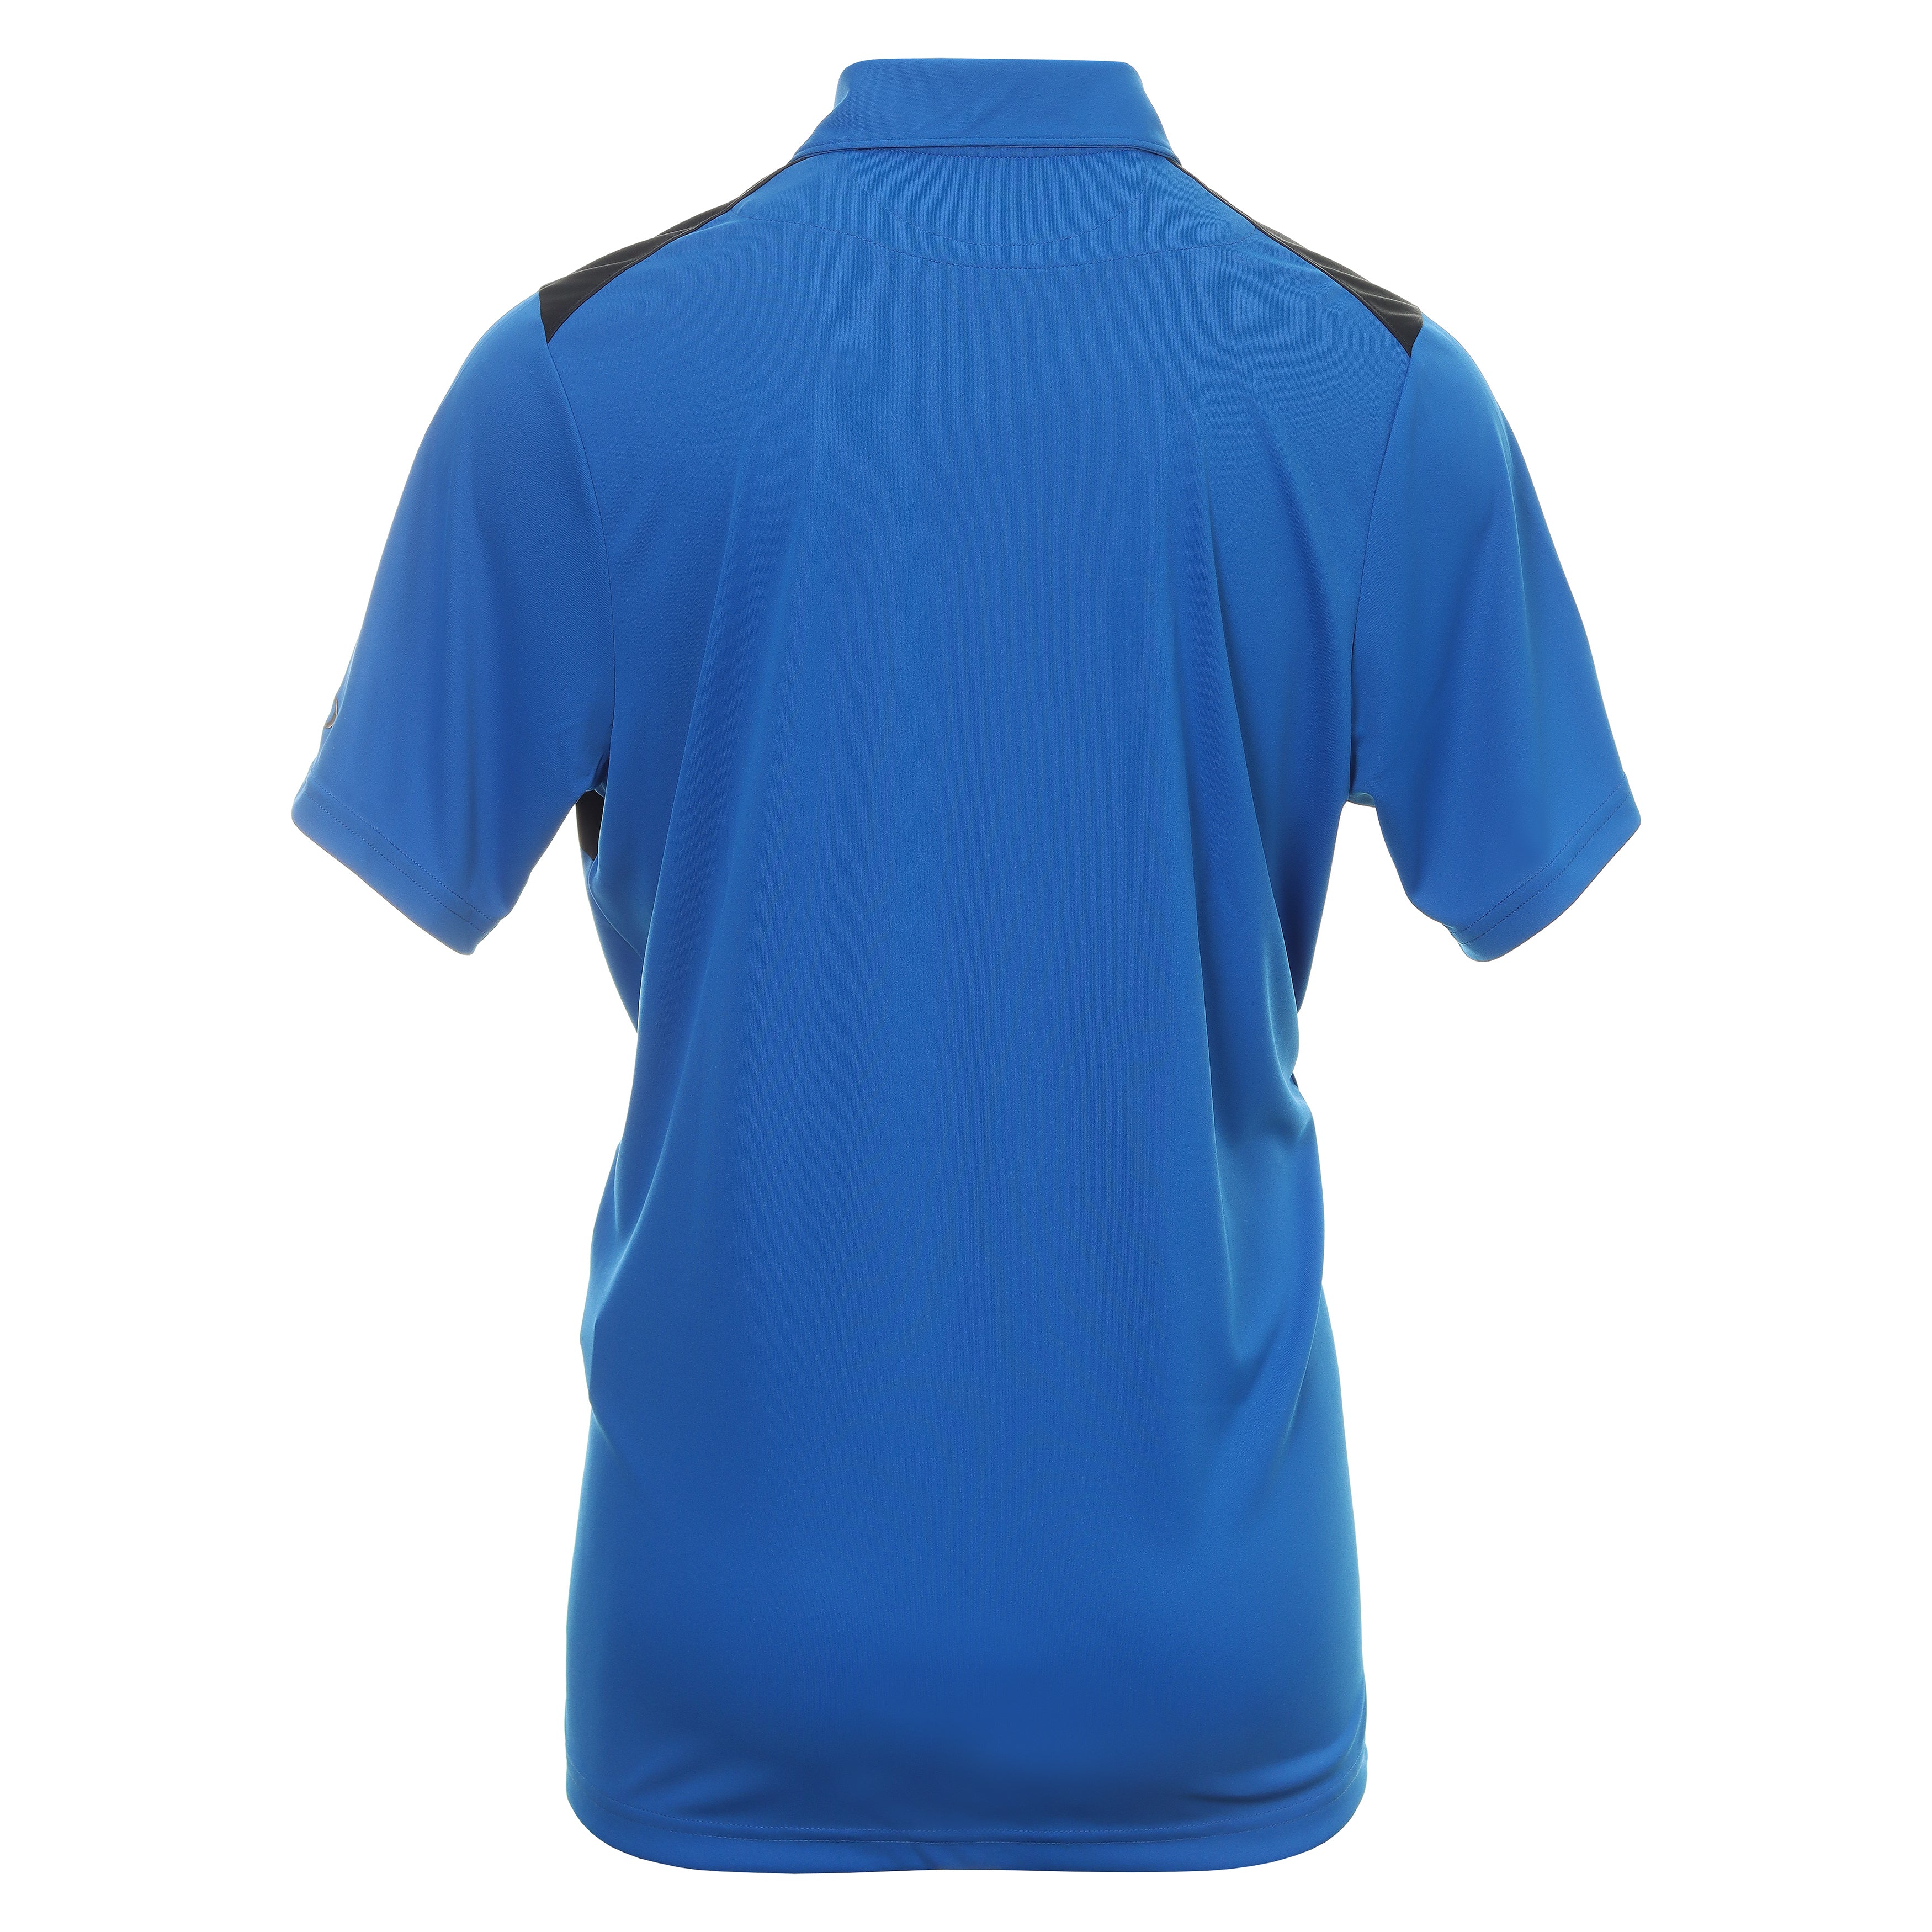 Oakley Golf Divisional Colour Block Shirt 403085 Ozone 62T | Function18 ...